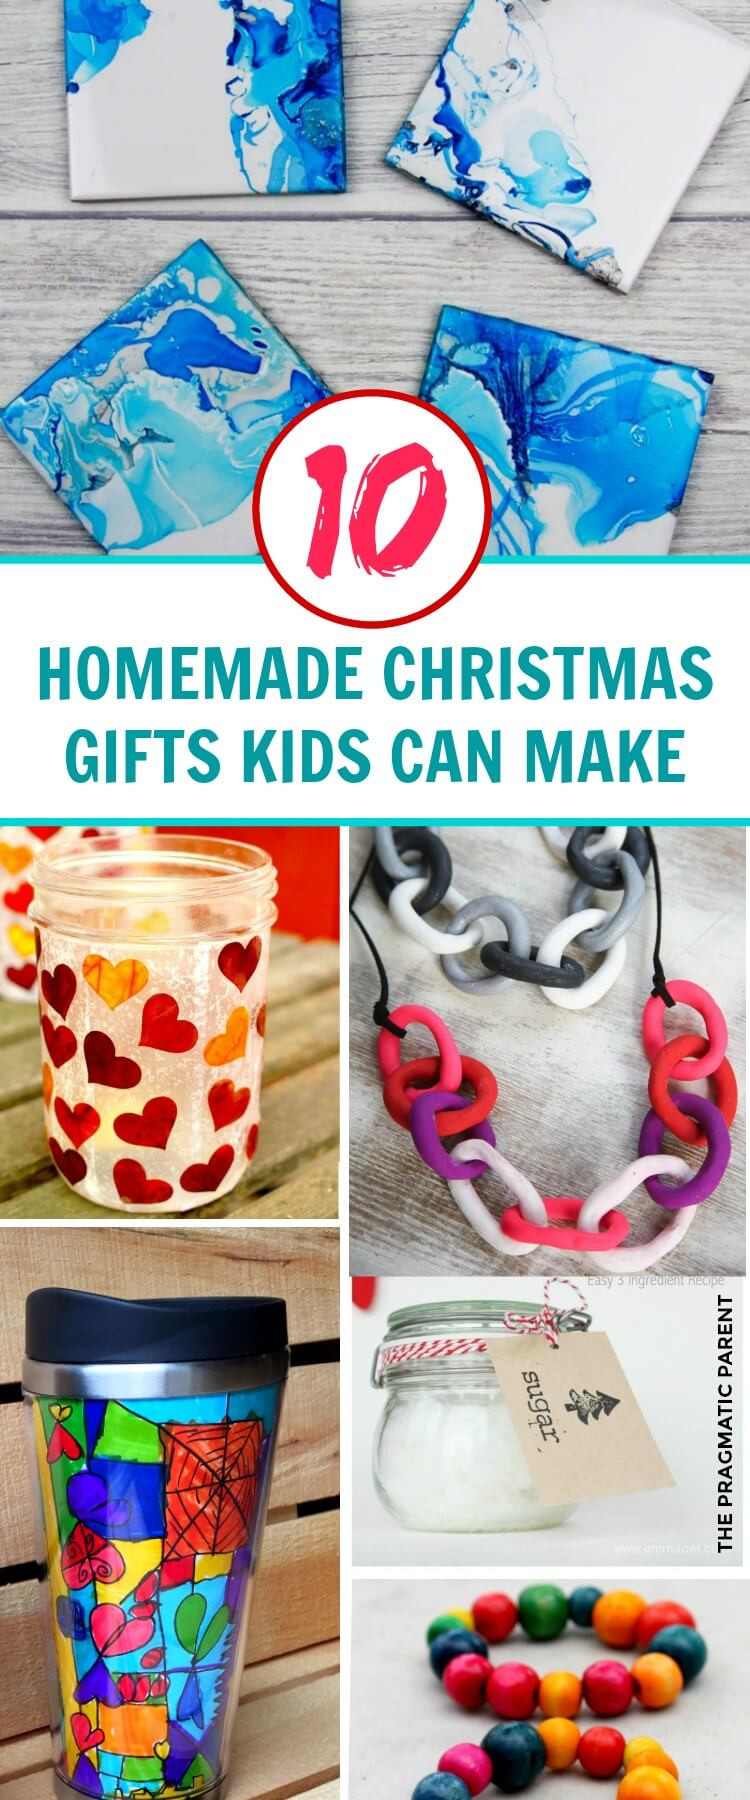 Christmas Gift Kids Can Make For Parents
 10 Beautiful Homemade Christmas Gifts Kids Can Make This 2020